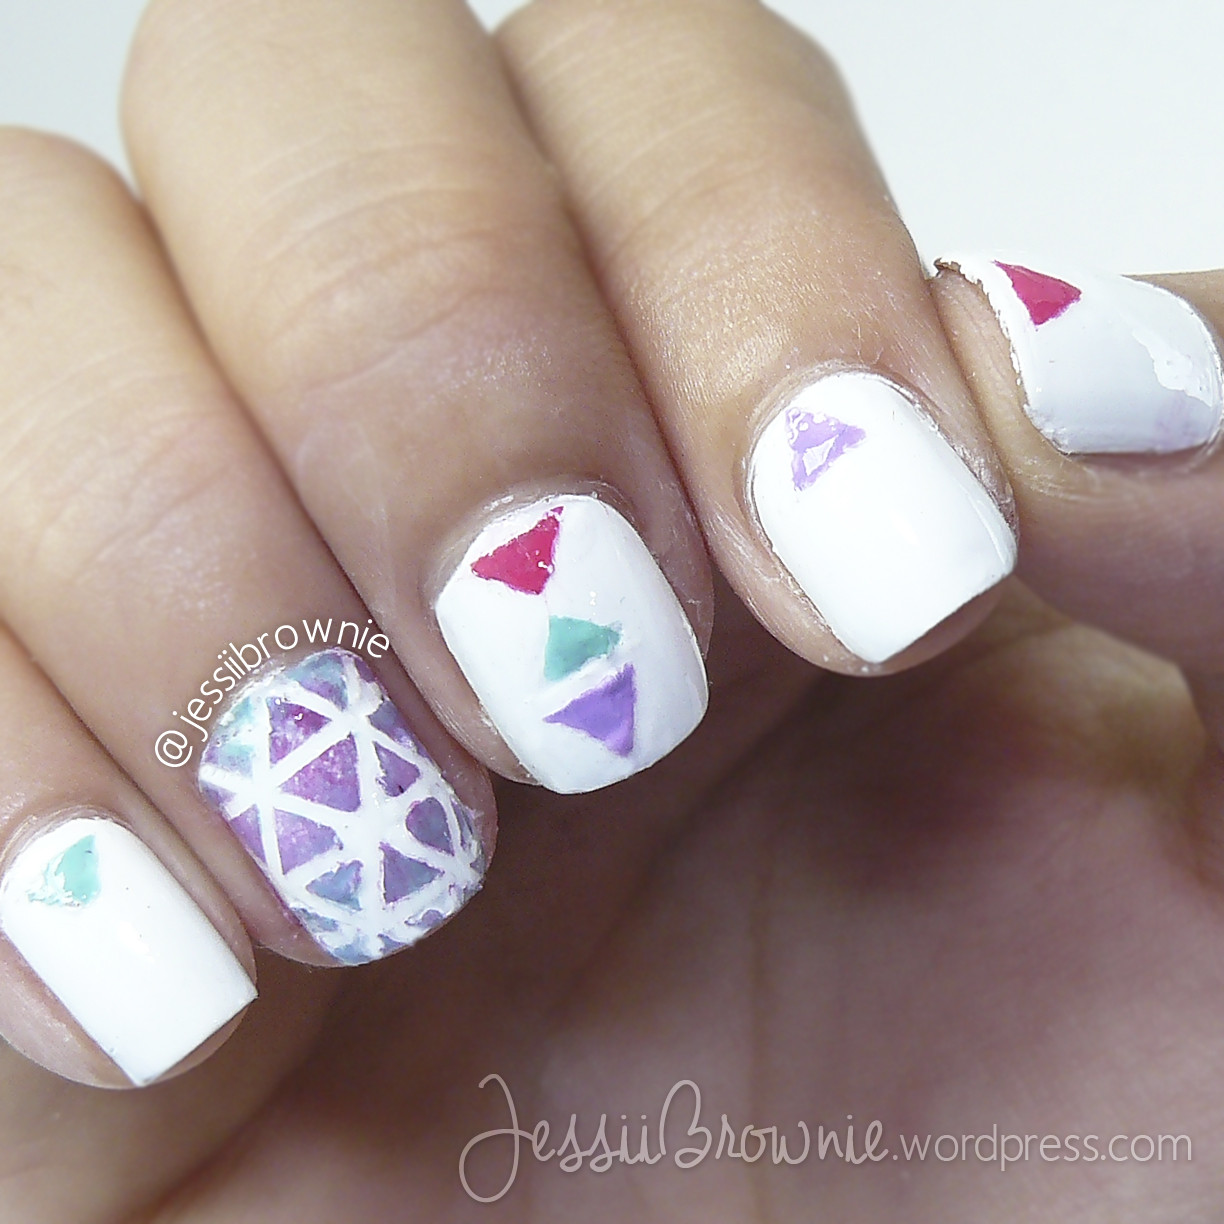 Triangle Nail Designs
 Galaxy and triangles Nail Art – JessiiBrownie